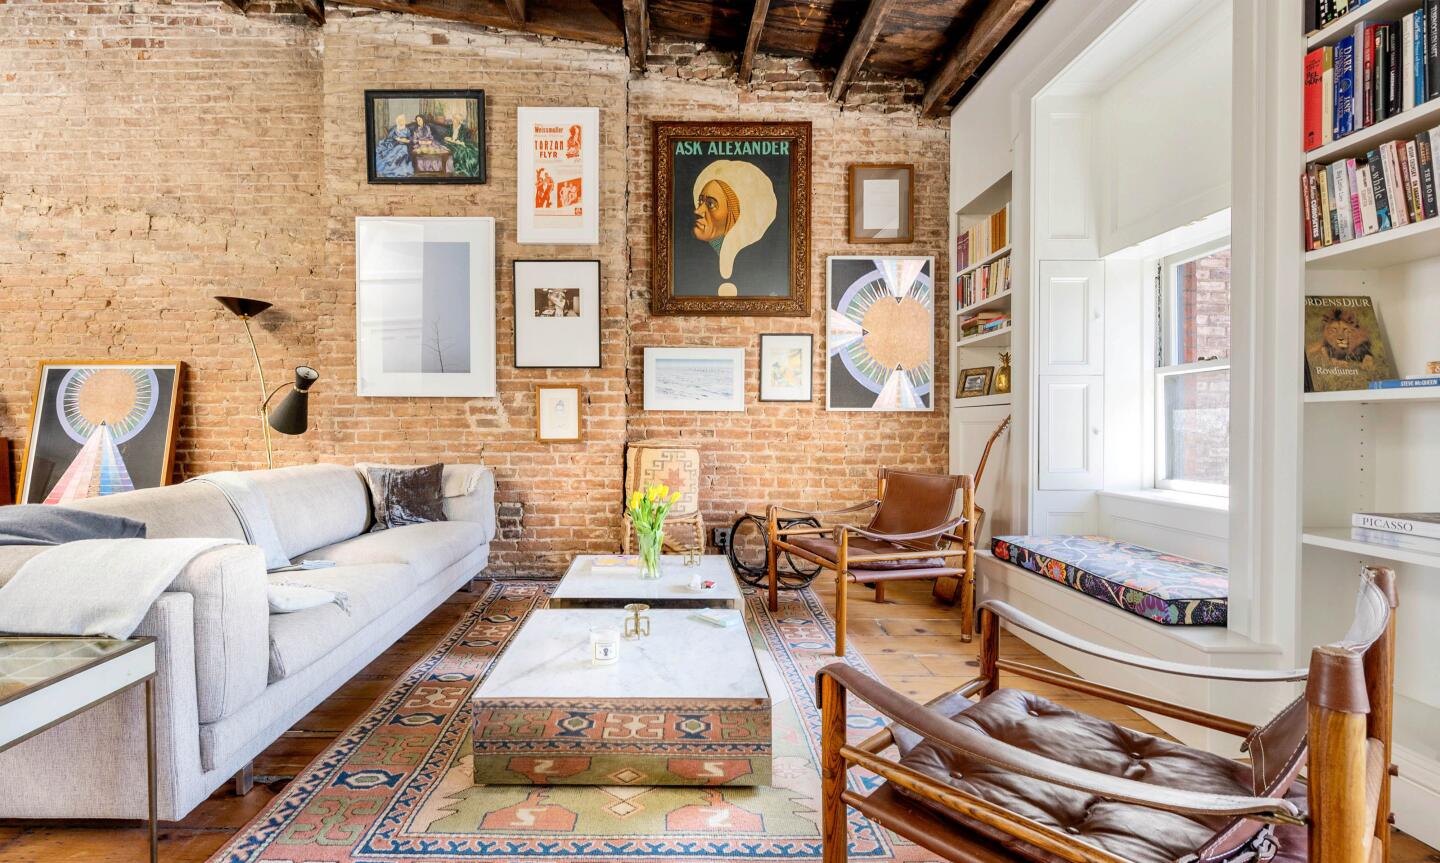 The pre-war penthouse mixes old and new with exposed brick and rustic beams broken up by five skylights.